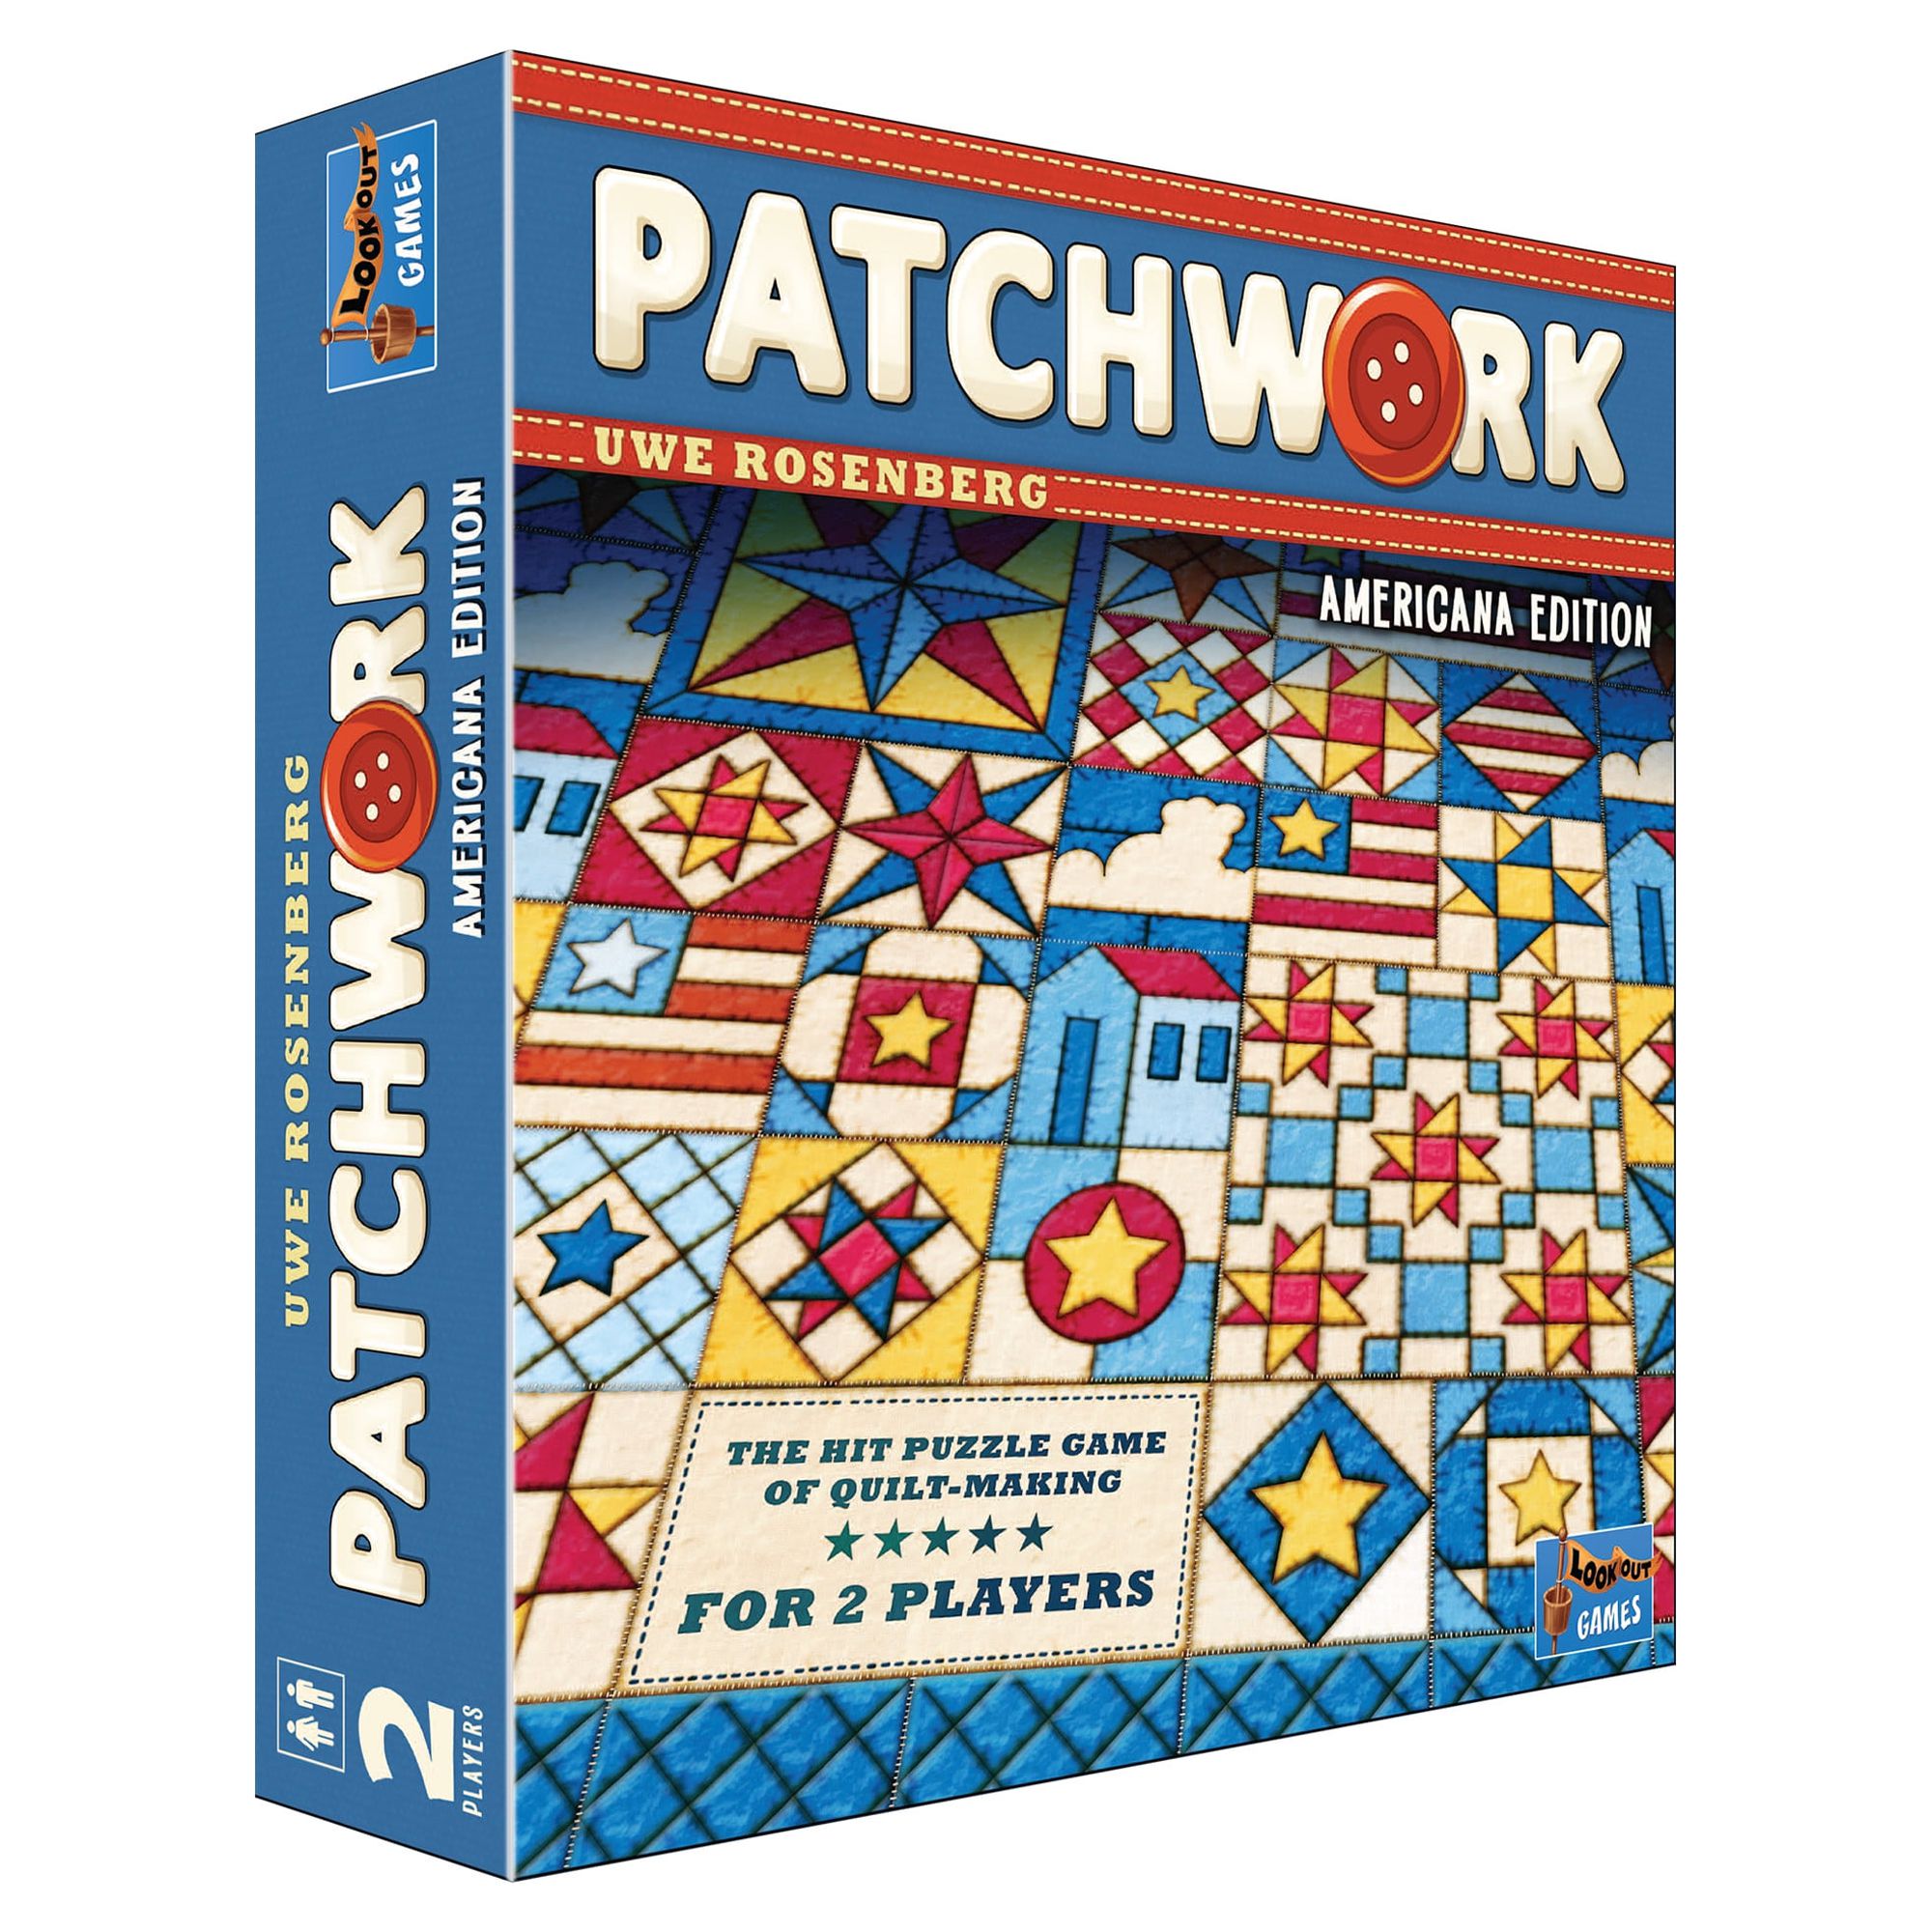 Patchwork Americana Family Board Game for Ages 8 and up, from Asmodee - image 1 of 5